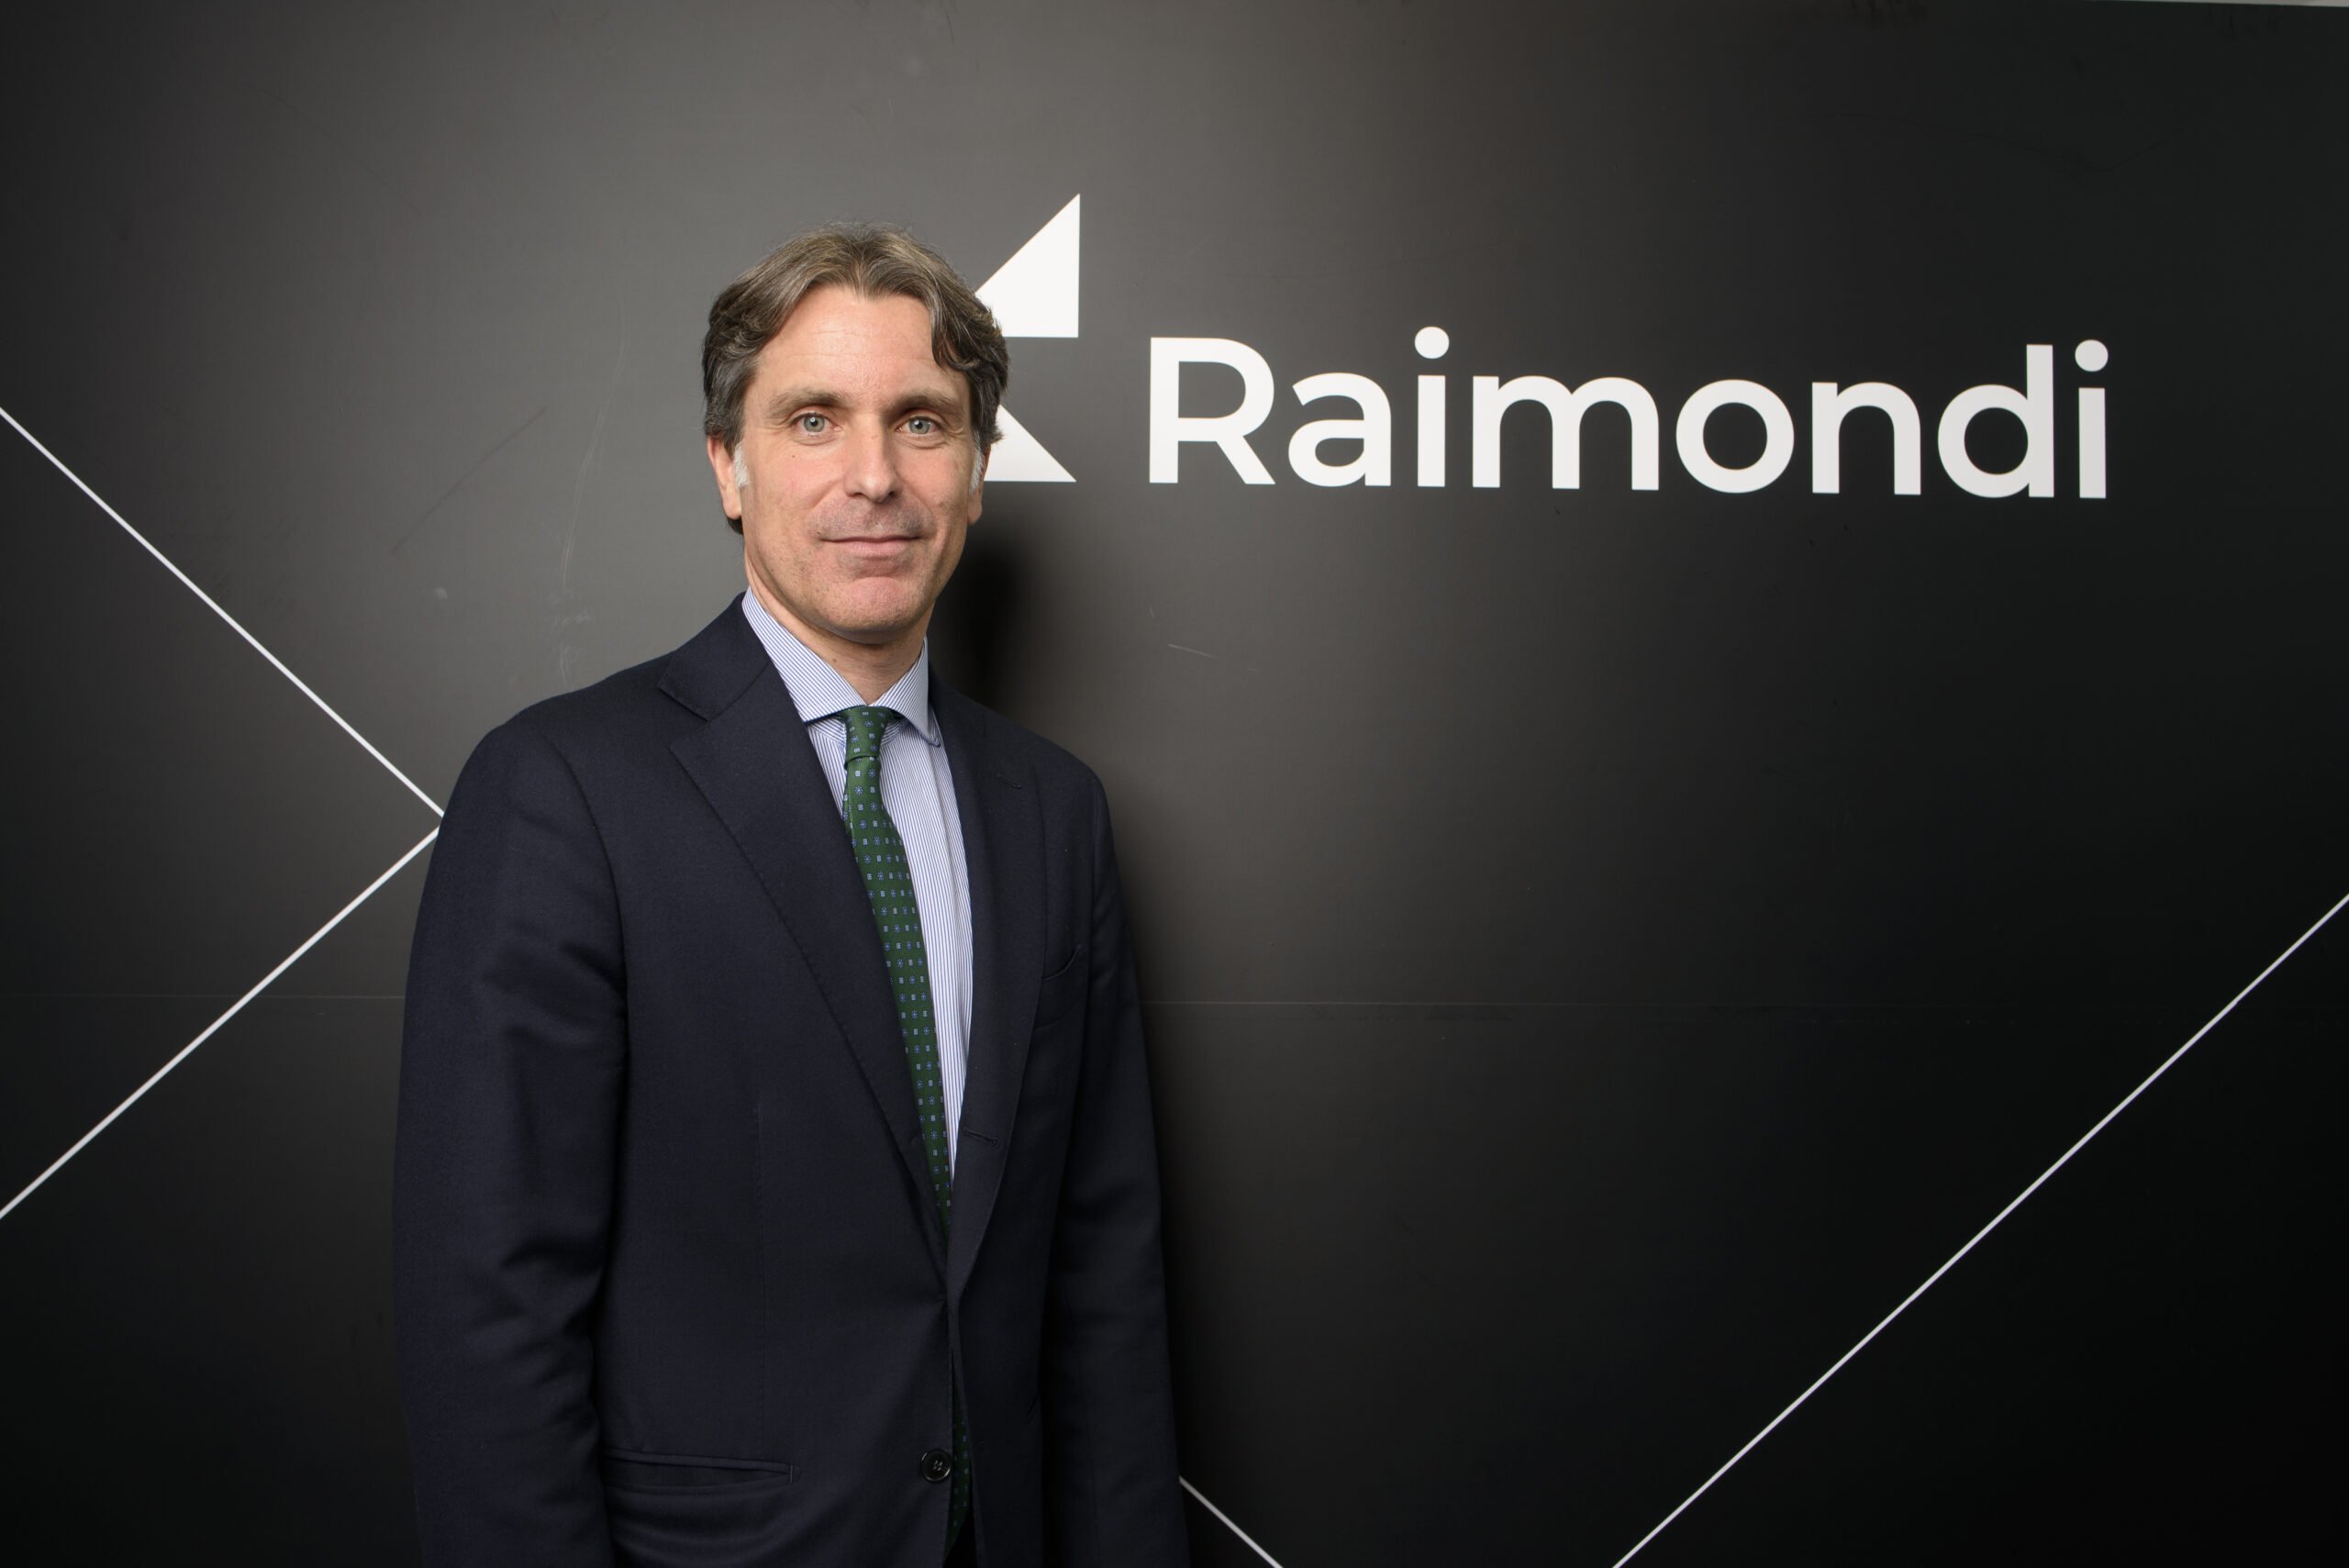 Raimondi Cranes appoints Luigi Maggioni to the role of Group Chief Executive Officer effective immediately